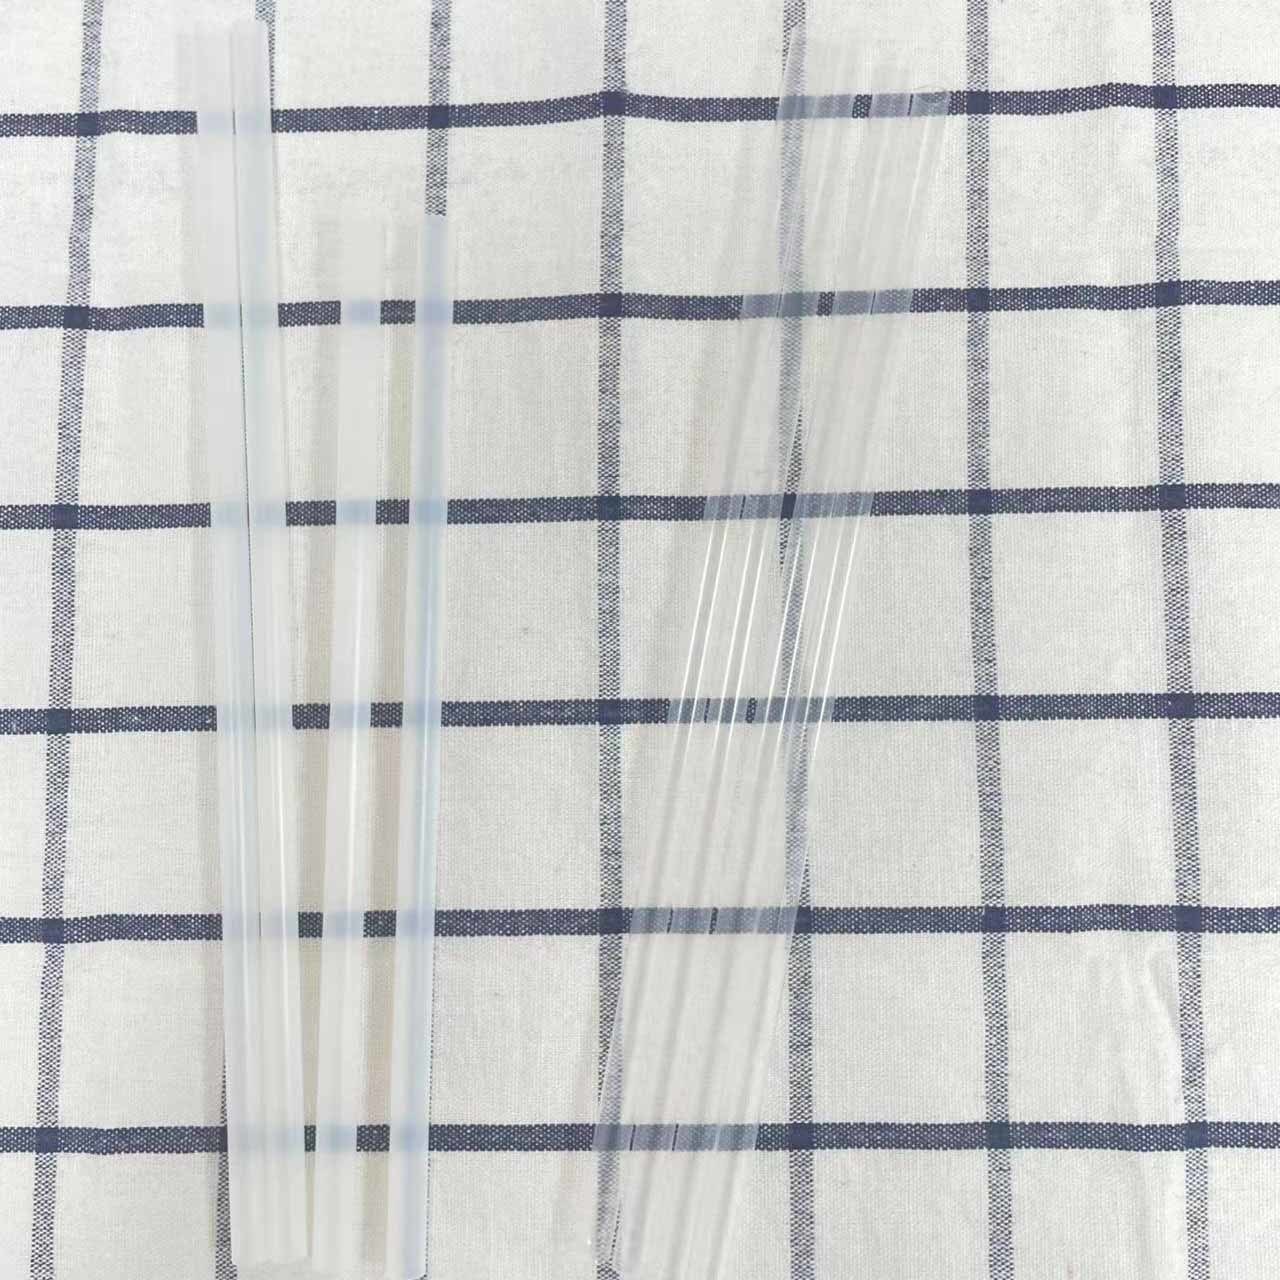 5*200mm White Color PLA Biodegradable Drinking Straw Biodegradable Straw